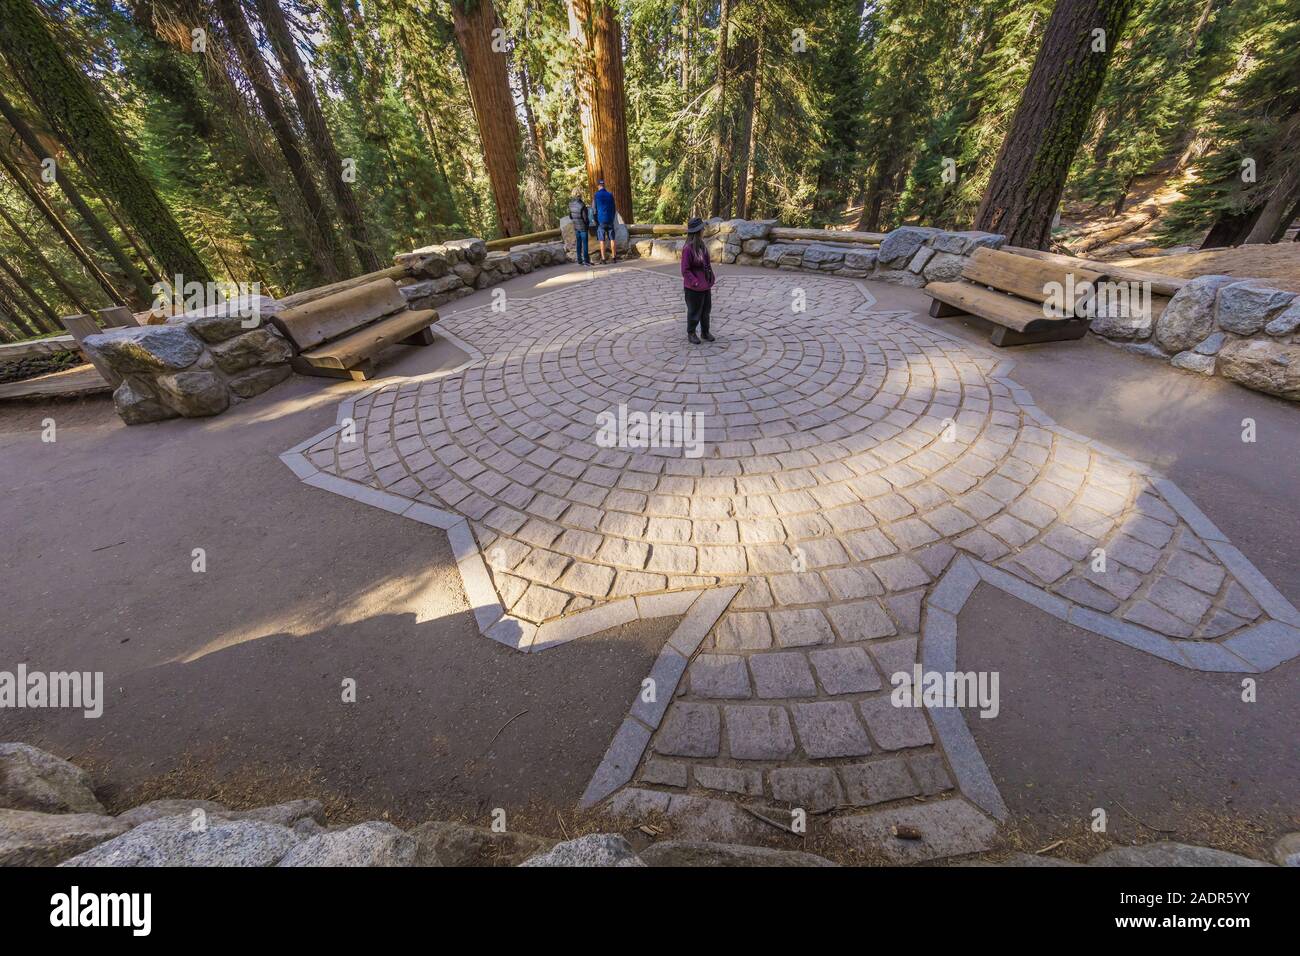 Design in trail to the General Sherman Tree, the largest tree in the world, showing the base size of the immense tree, in Sequoia National Park, Calif Stock Photo